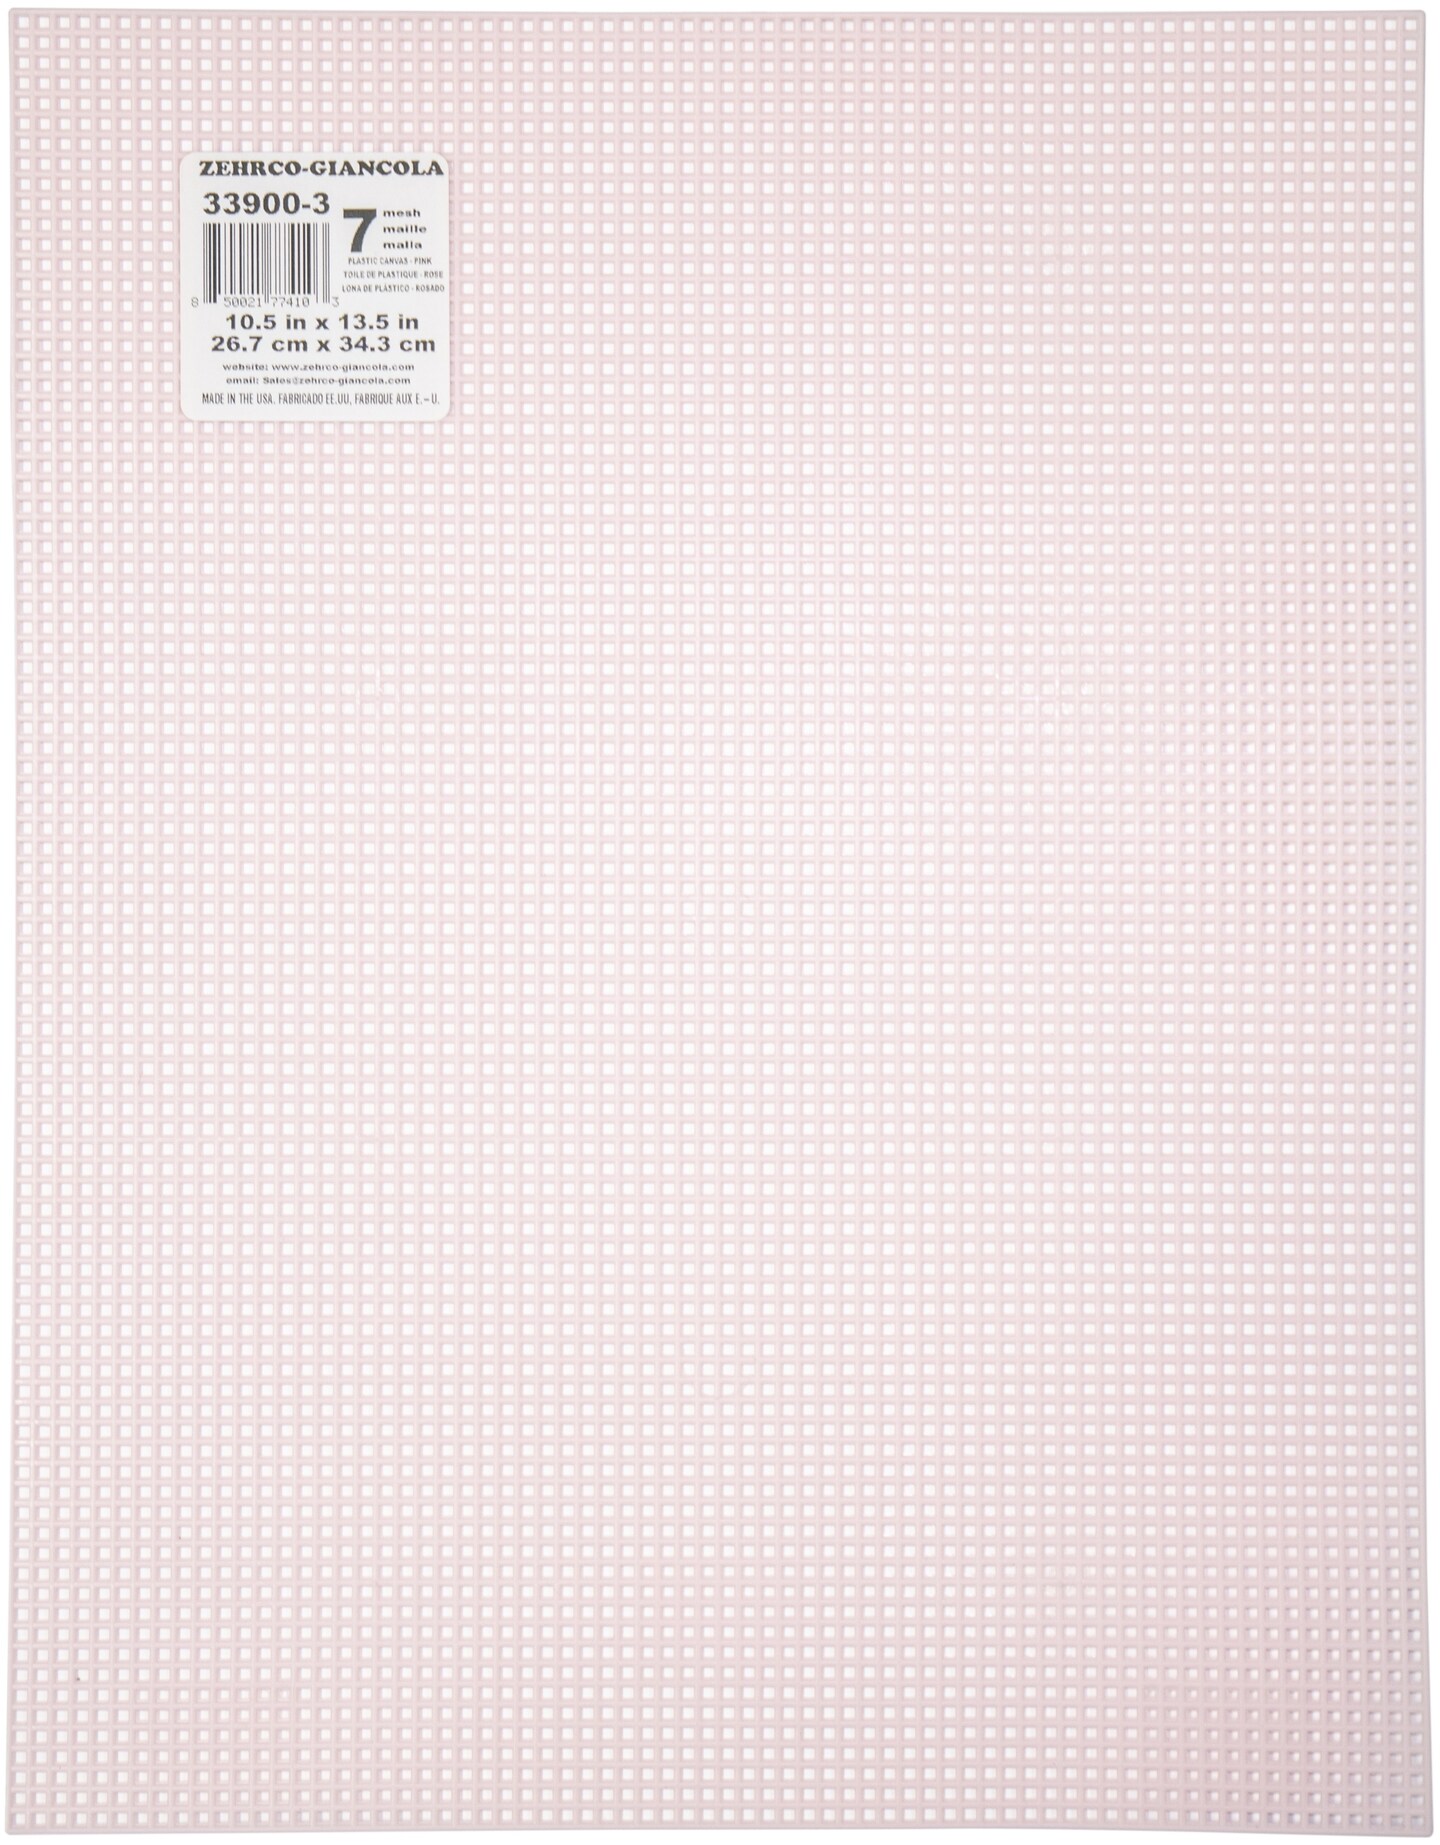 Plastic Canvas Sheets: 7 count, 10.5 in x 13.5 in, orange